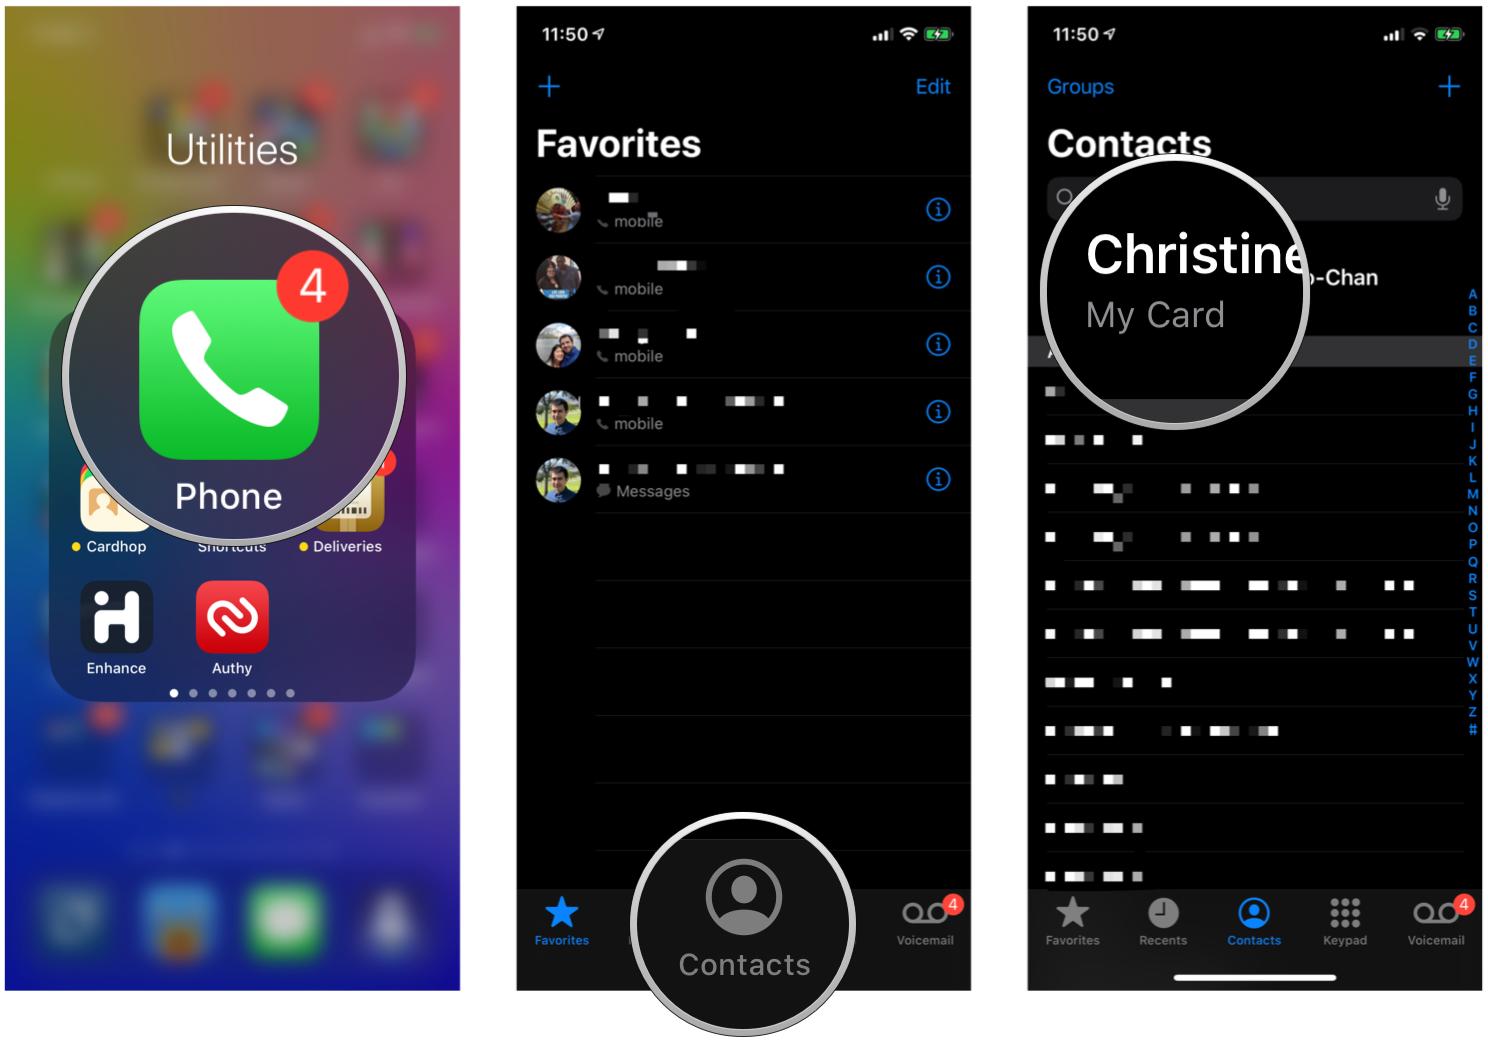 Launch Contacts or Phone, tap Contacts in Phone, tap your Contact Card at the top